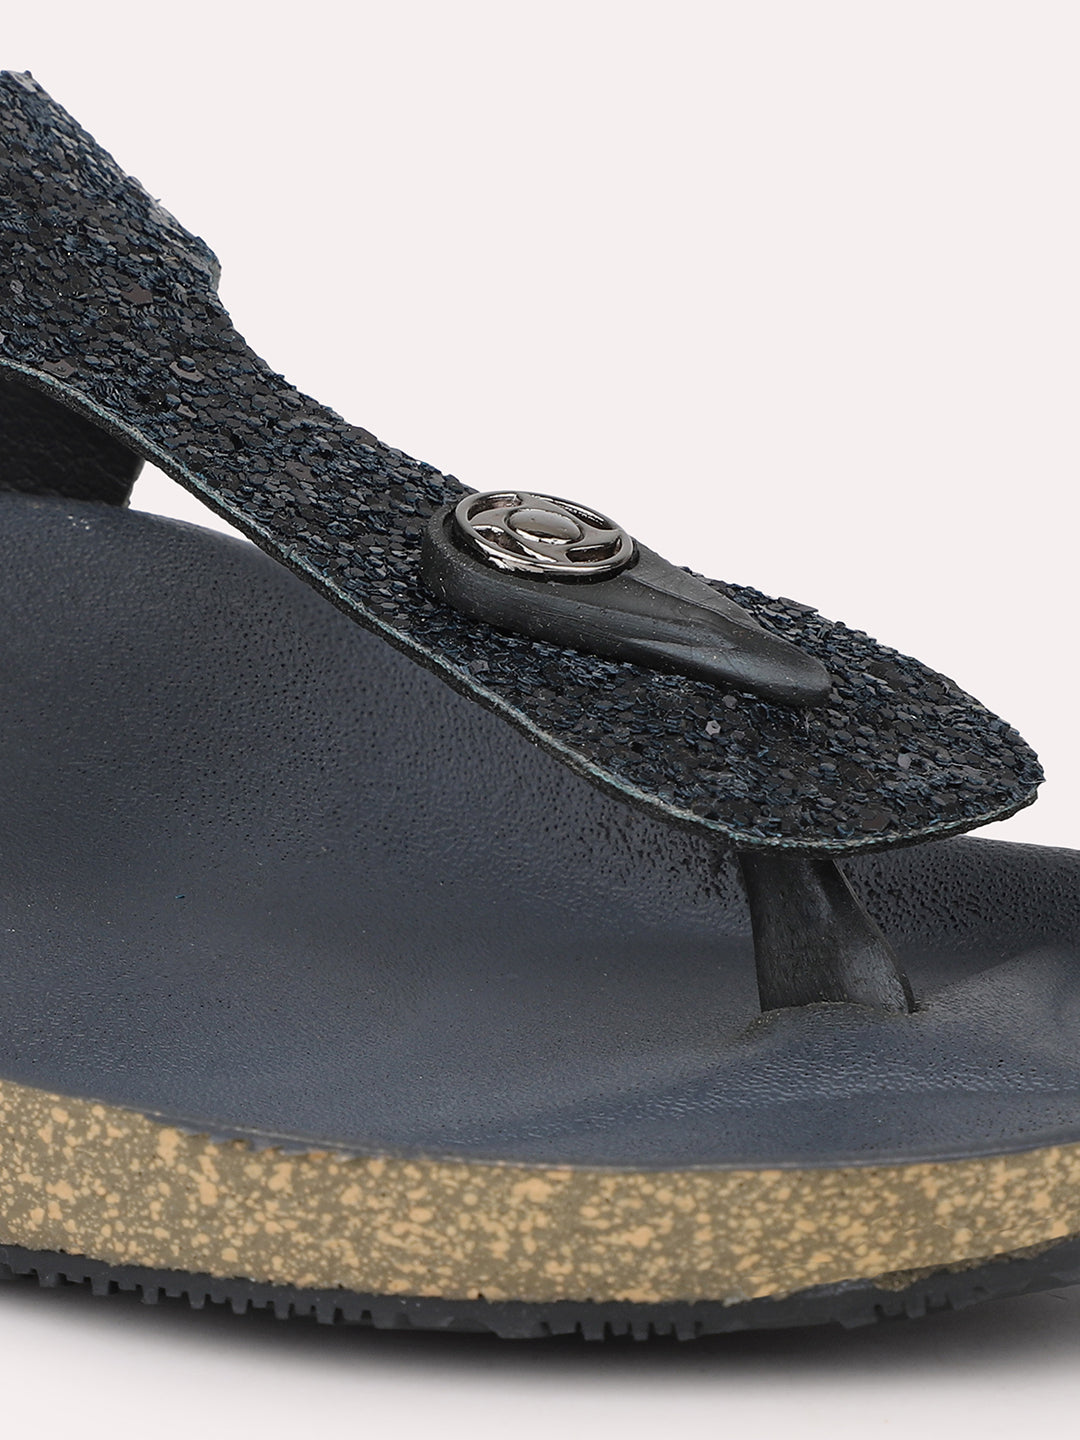 Women Black Cork Finish Comfort T-Strap Flats With Buckle Detail